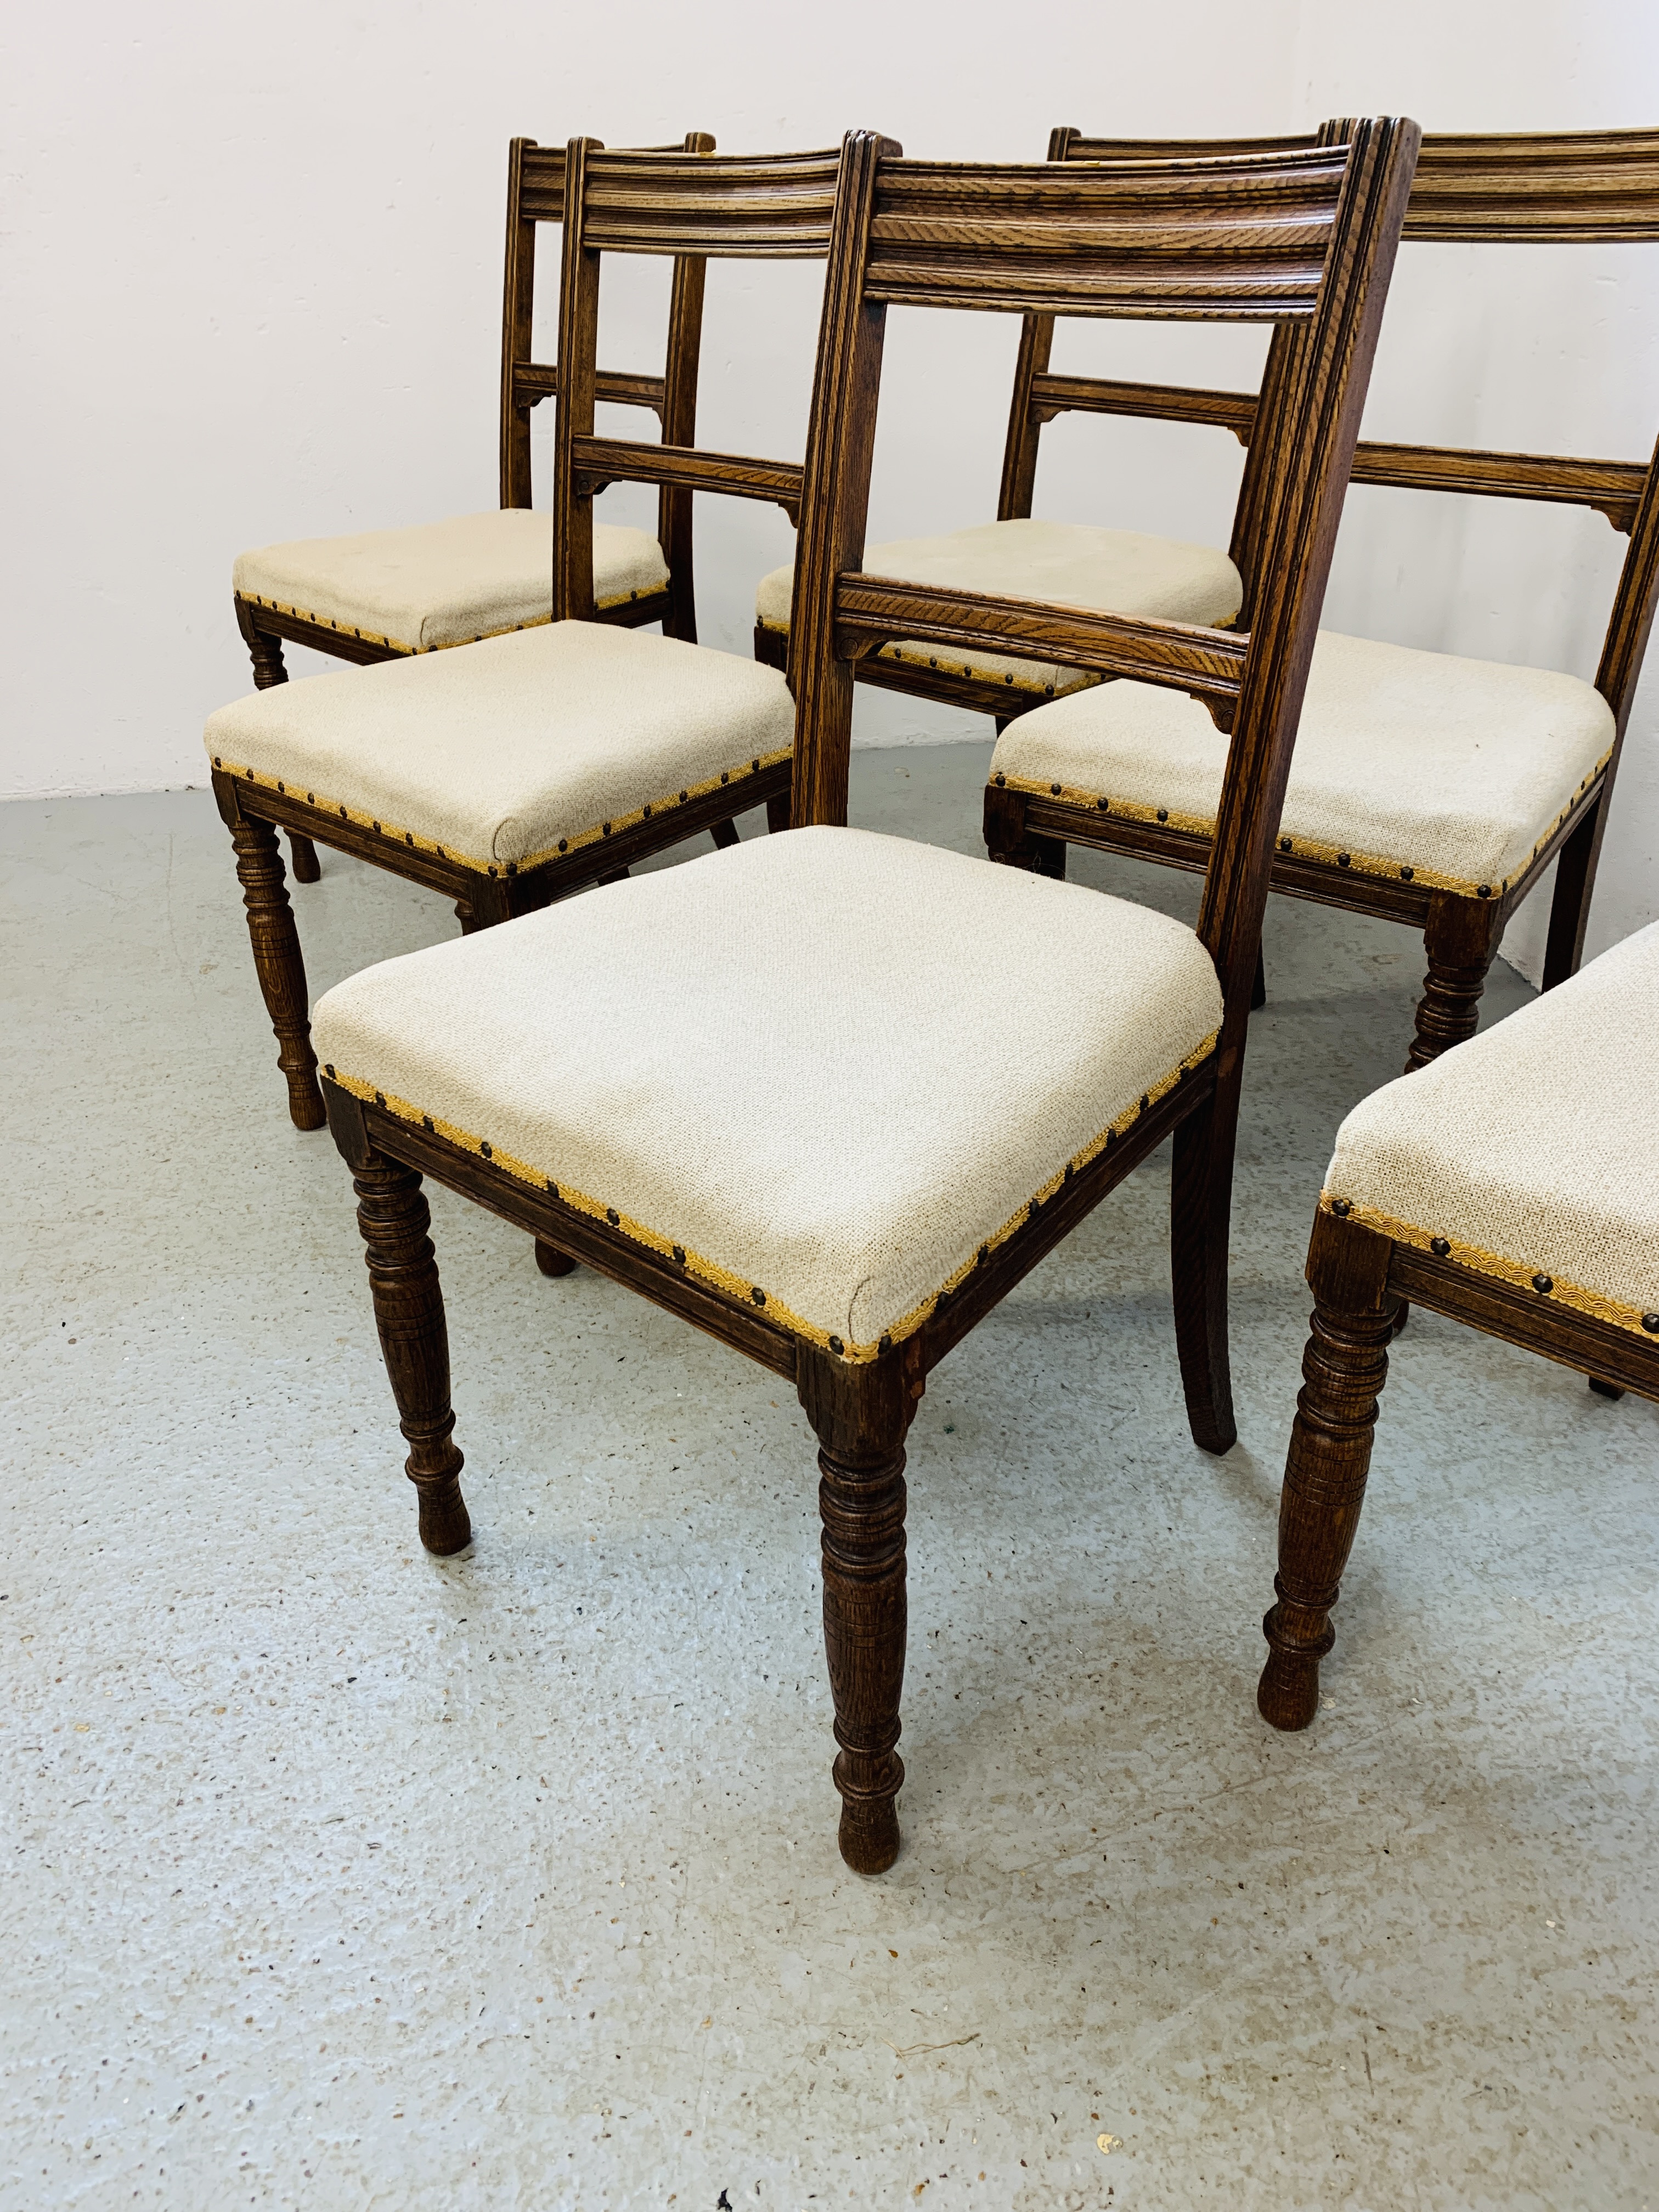 A SET OF 6 OAK FRAMED EDWARDIAN DINING CHAIRS ALONG WITH A SOLID OAK GATELEG DINING TABLE - Image 2 of 20